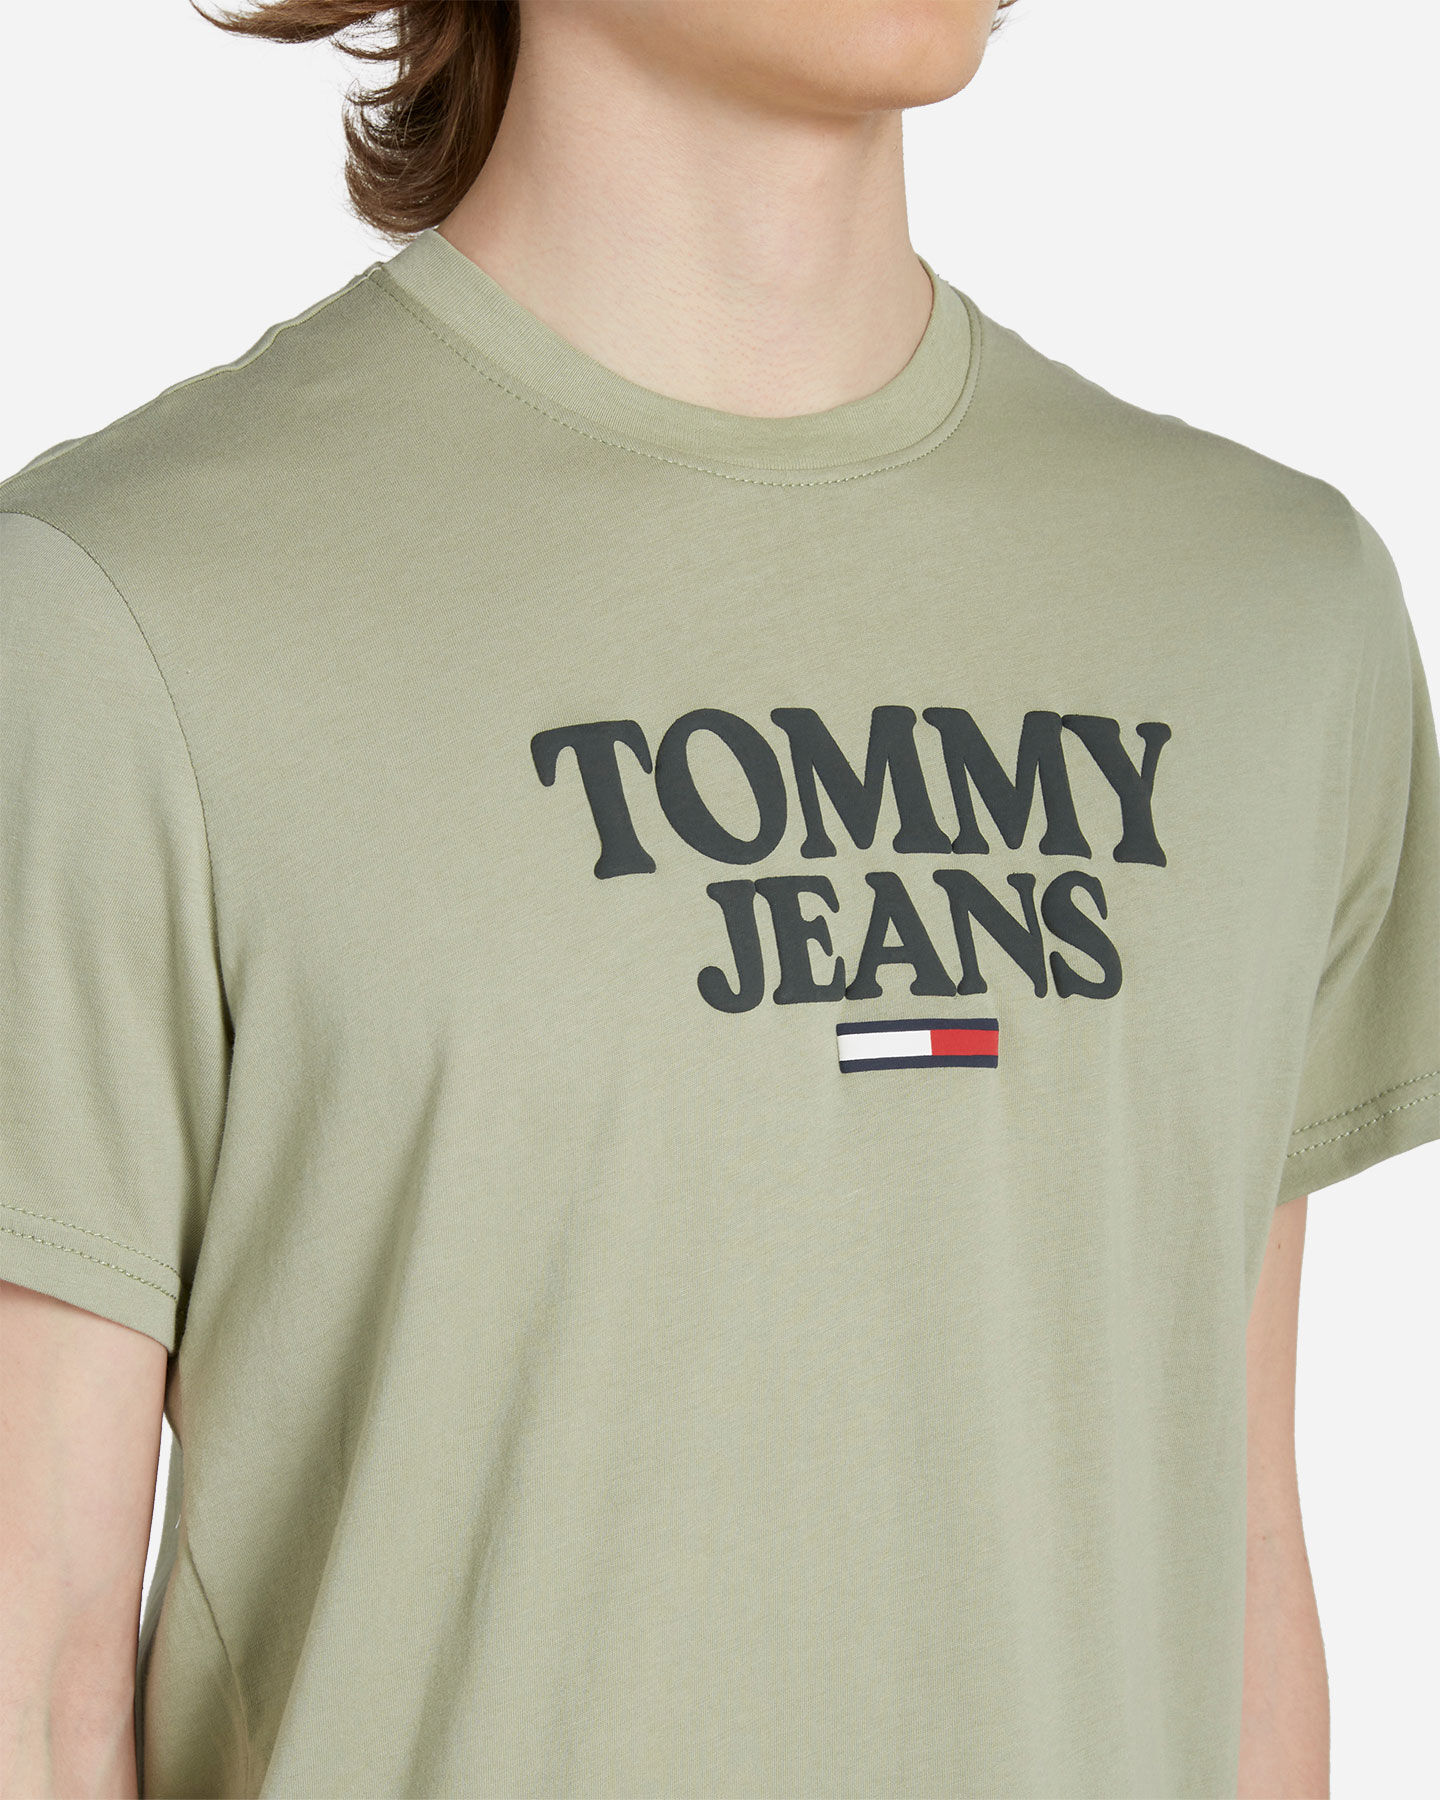  T-Shirt TOMMY HILFIGER TONAL ENTRY M S4105802|PMI|S scatto 4